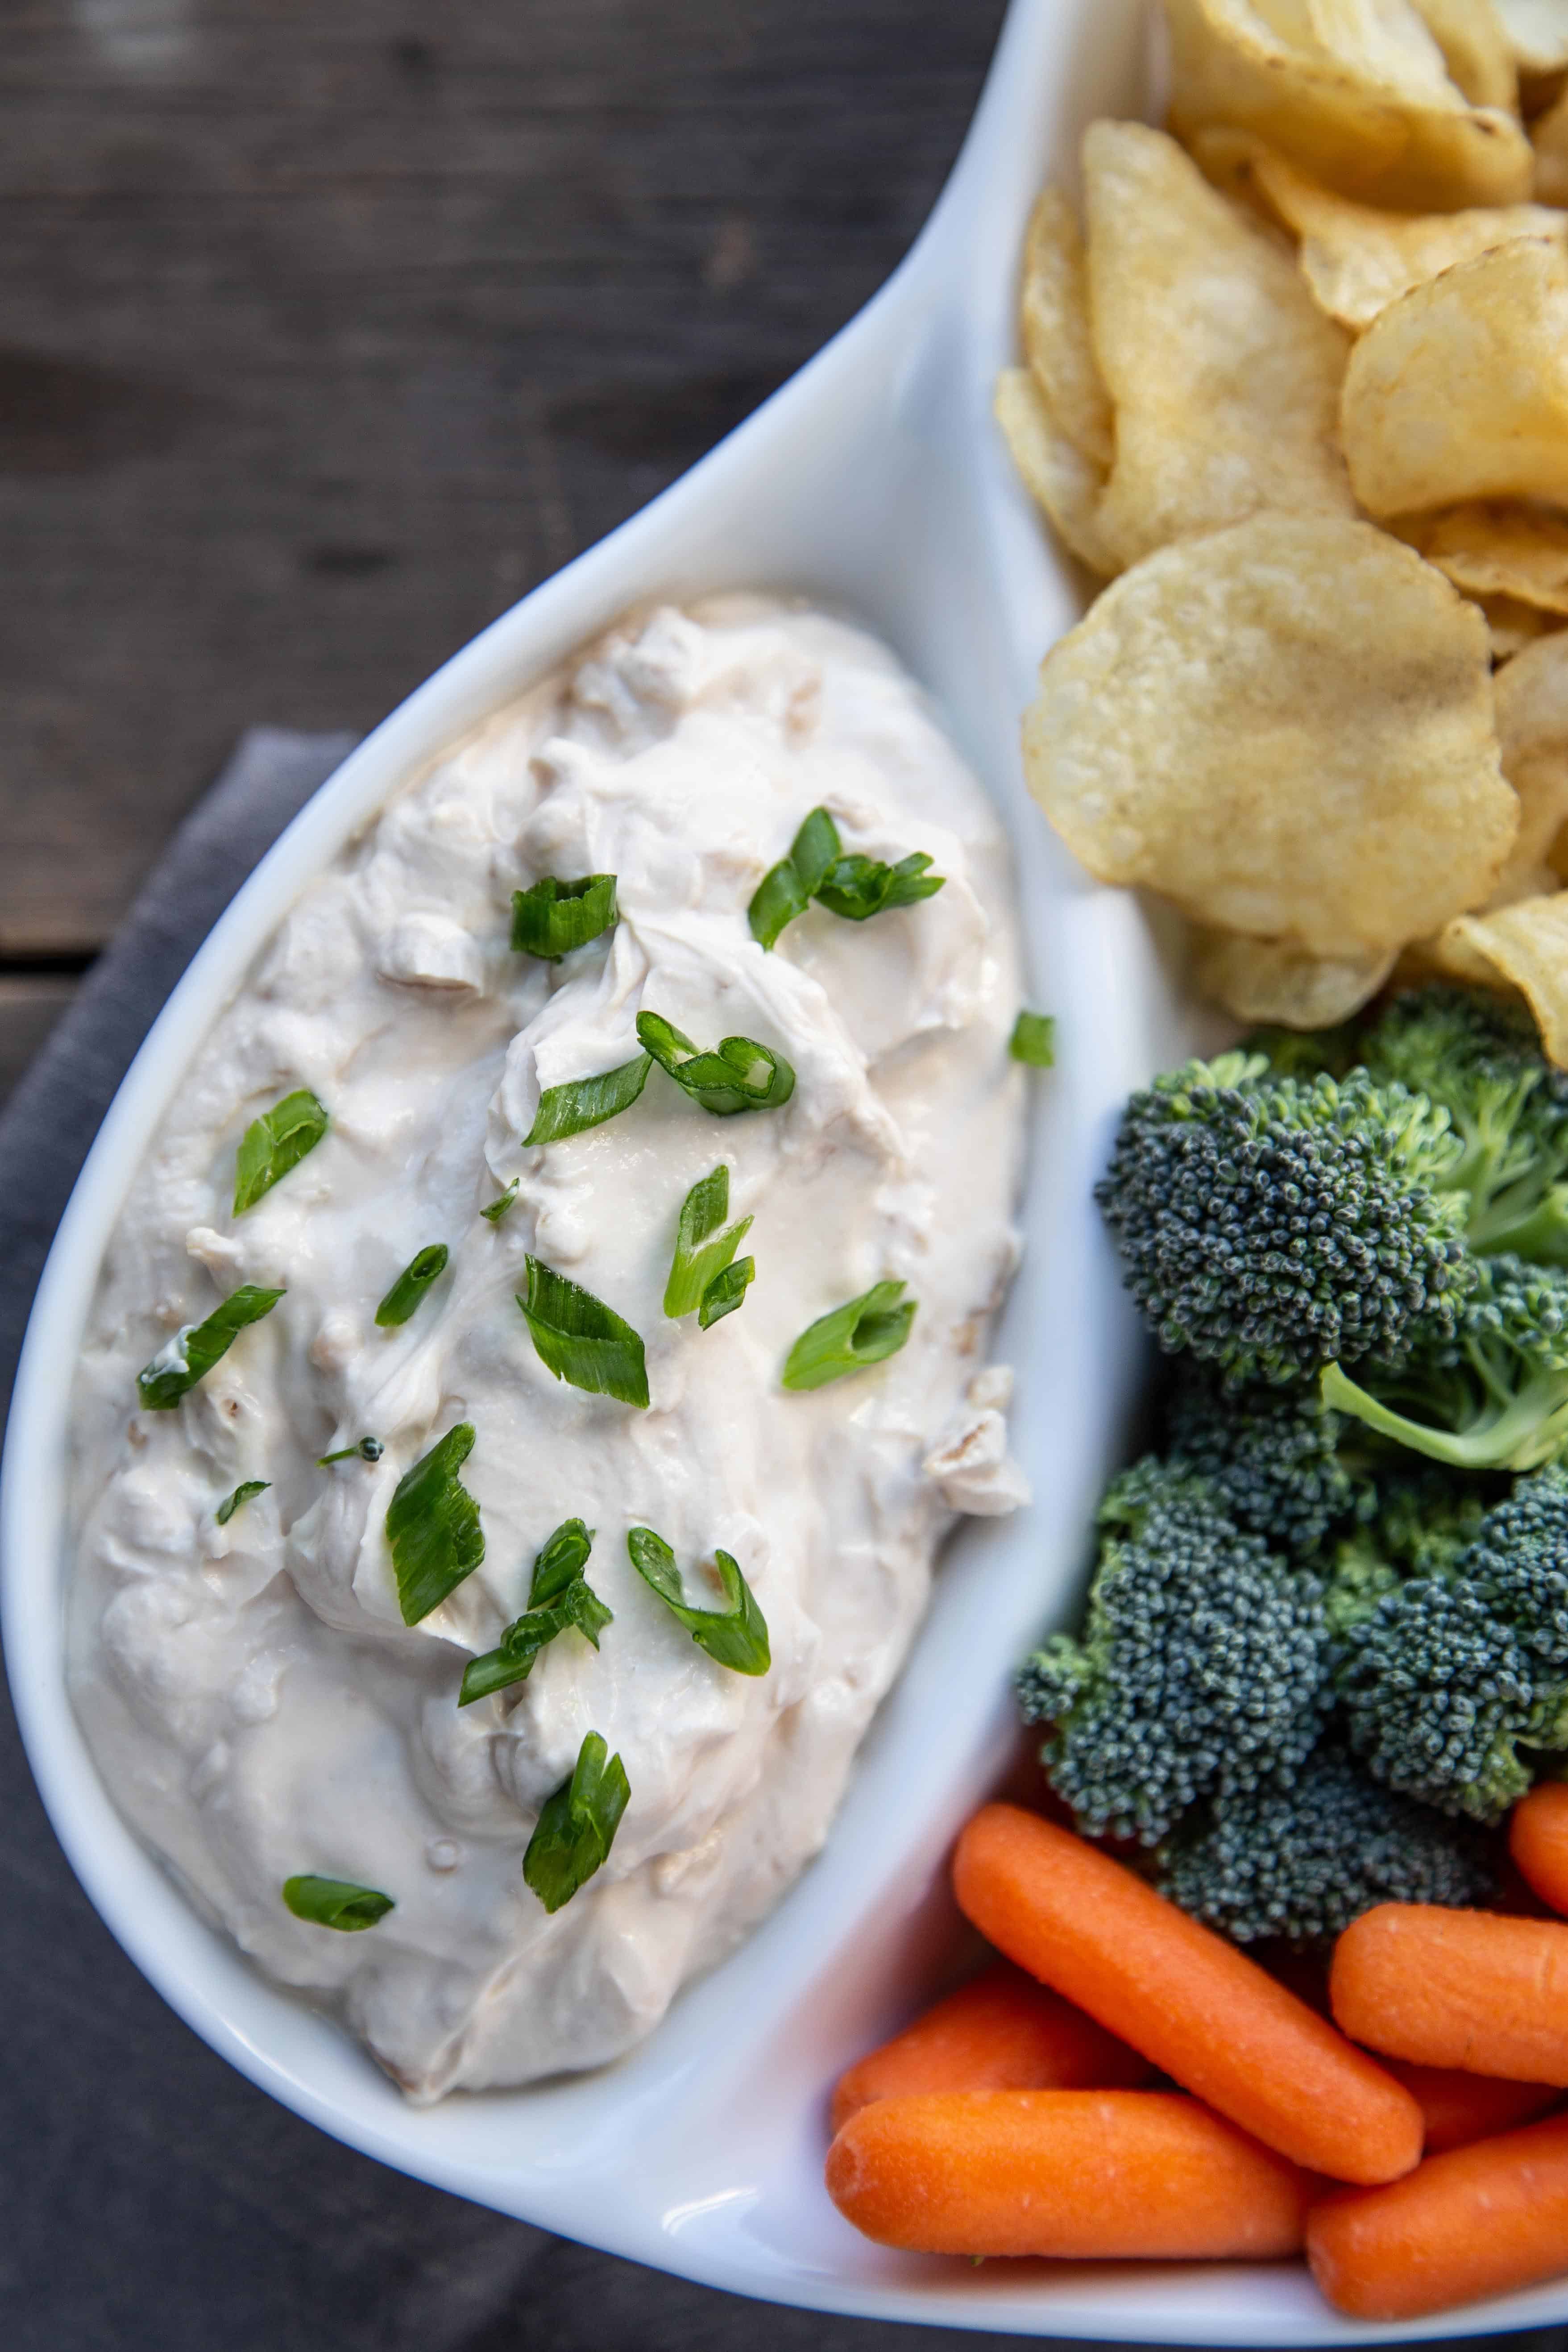 French onion dip in a white dish with raw veggies and potato chips.